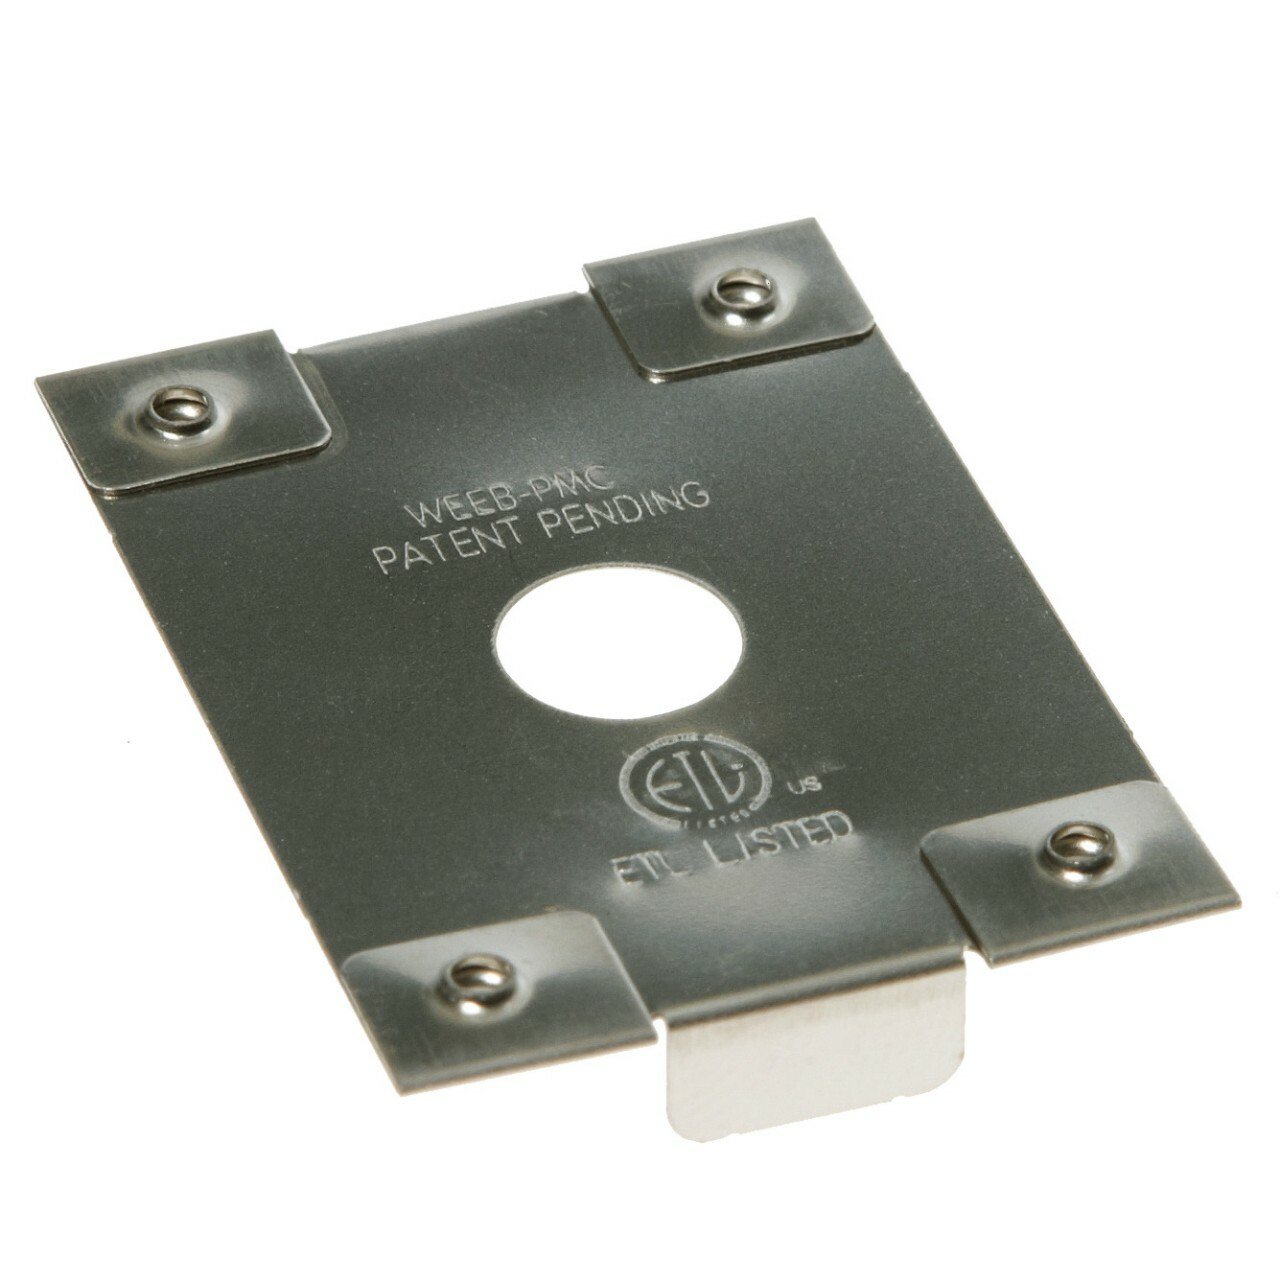 Wiley Electronics WEEB-PMC Grounding Clip for ProSolar RoofTrac or AEE SnapNRack Rails